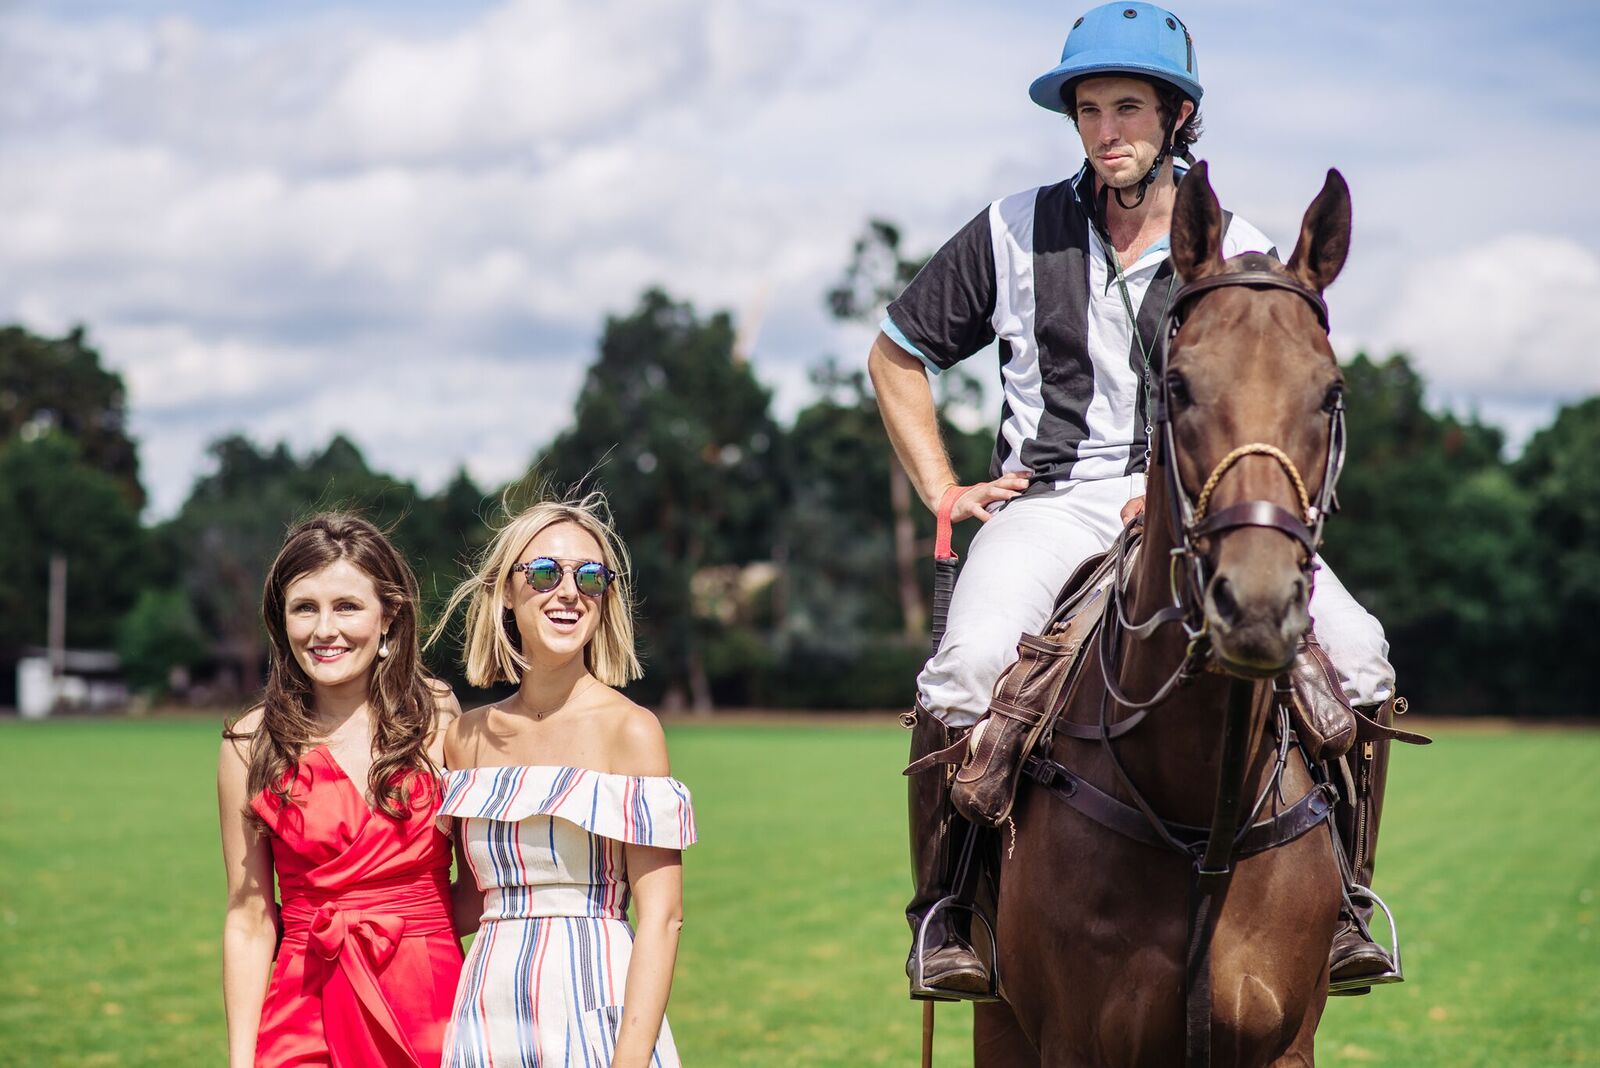 Meeting at a polo match is a bit more romantic than grabbing an after work cocktail. 